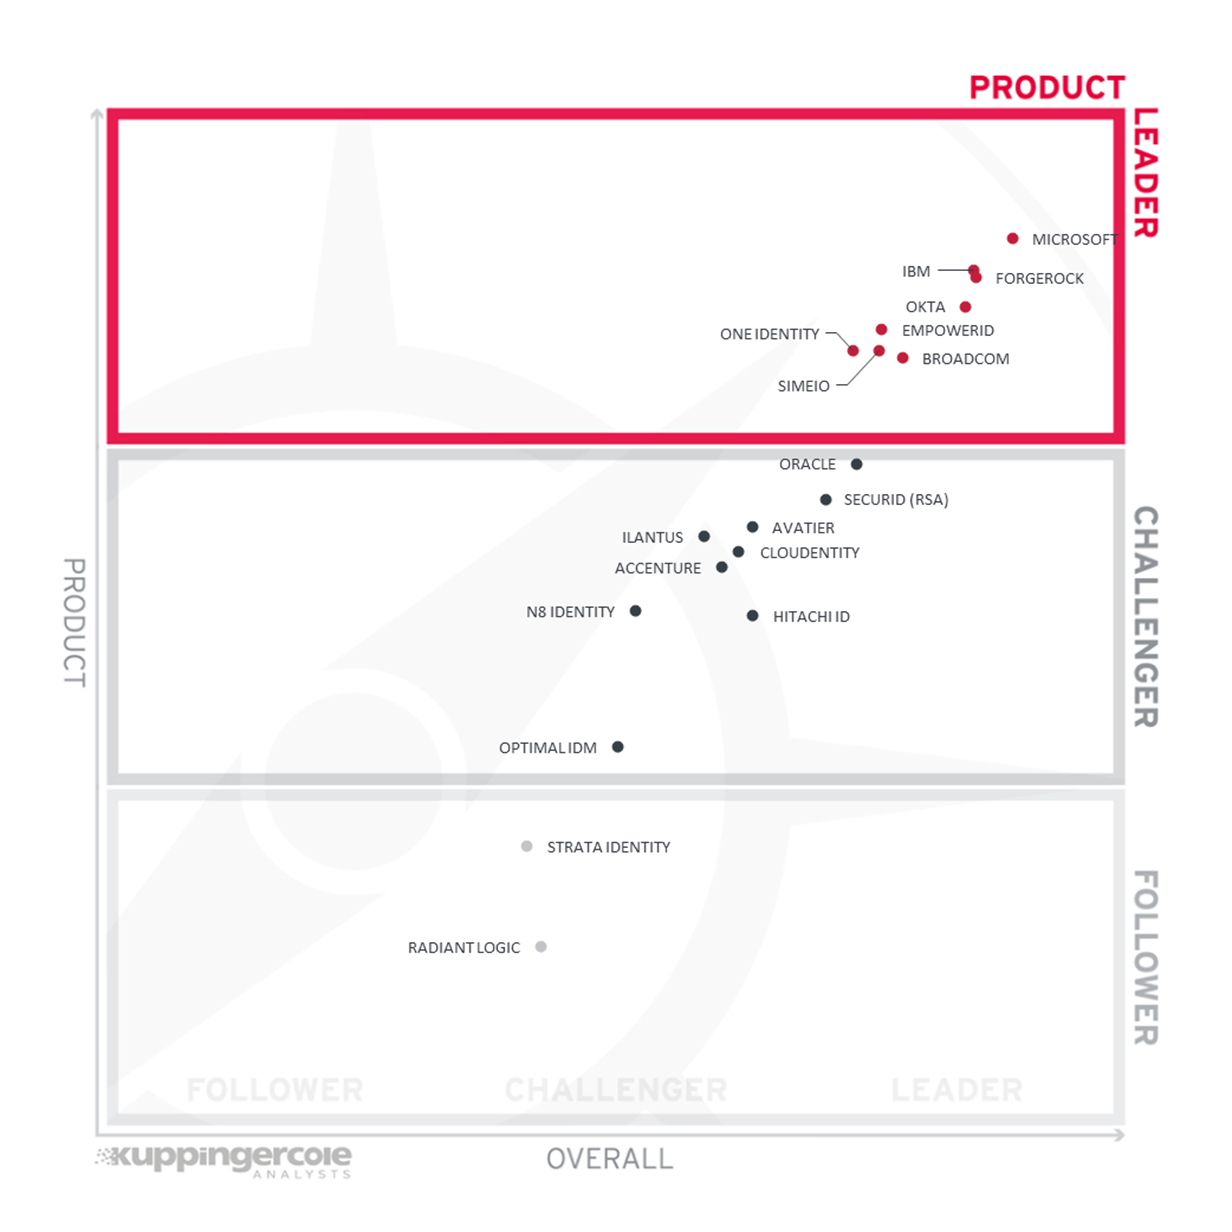 The Product Leadership rating for the LC Identity Fabrics.